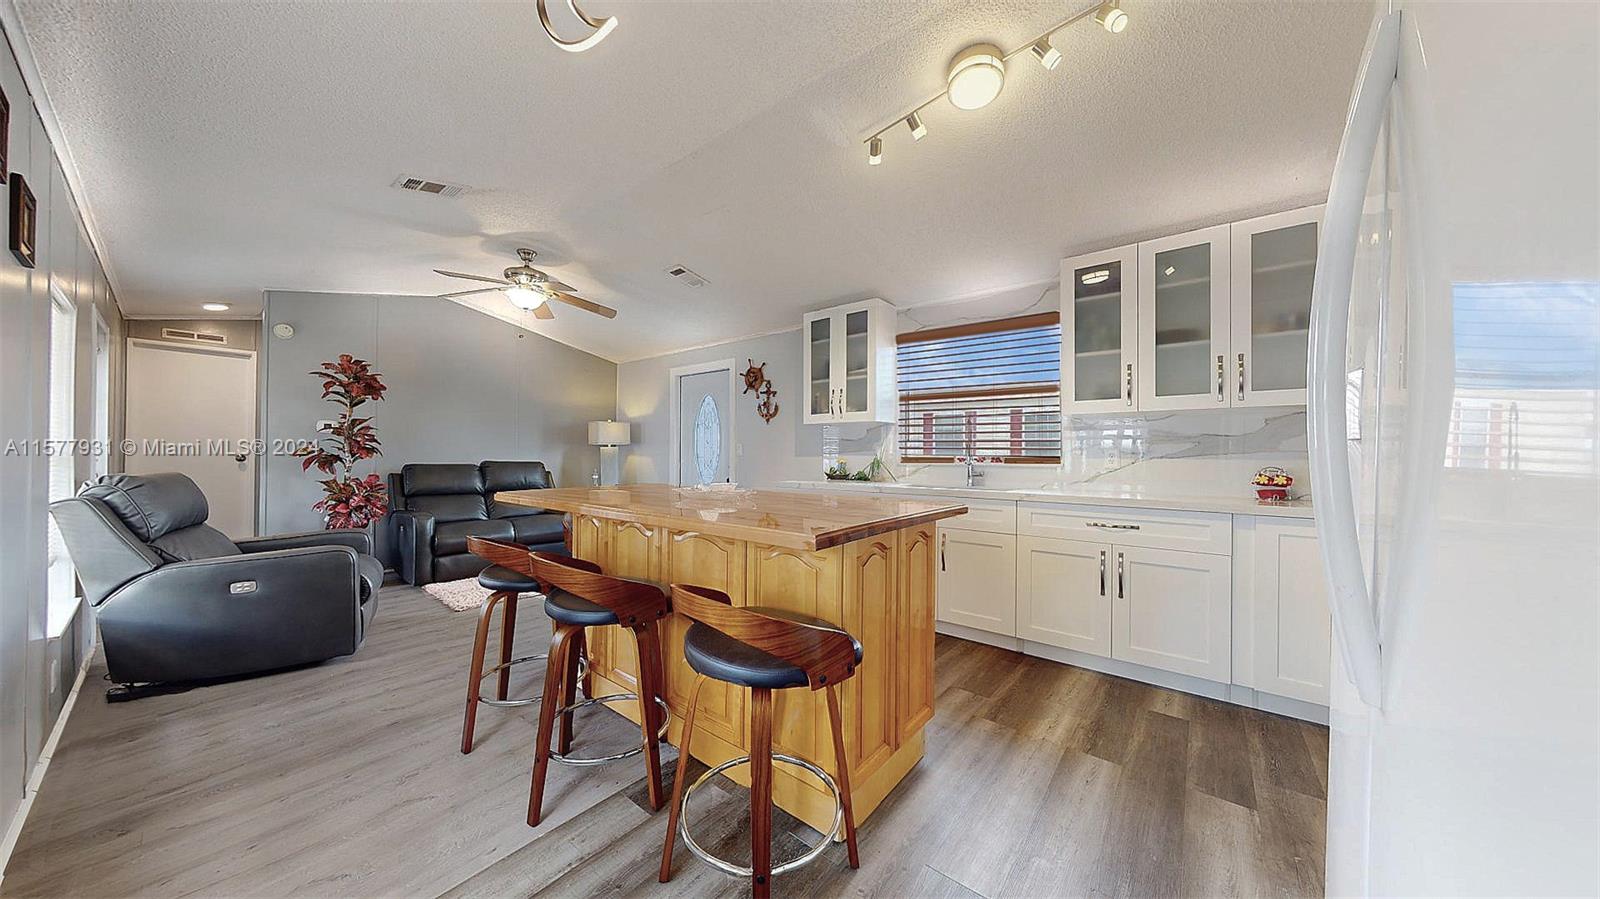 a kitchen with stainless steel appliances granite countertop a kitchen island hardwood floor sink stove dining table and chairs